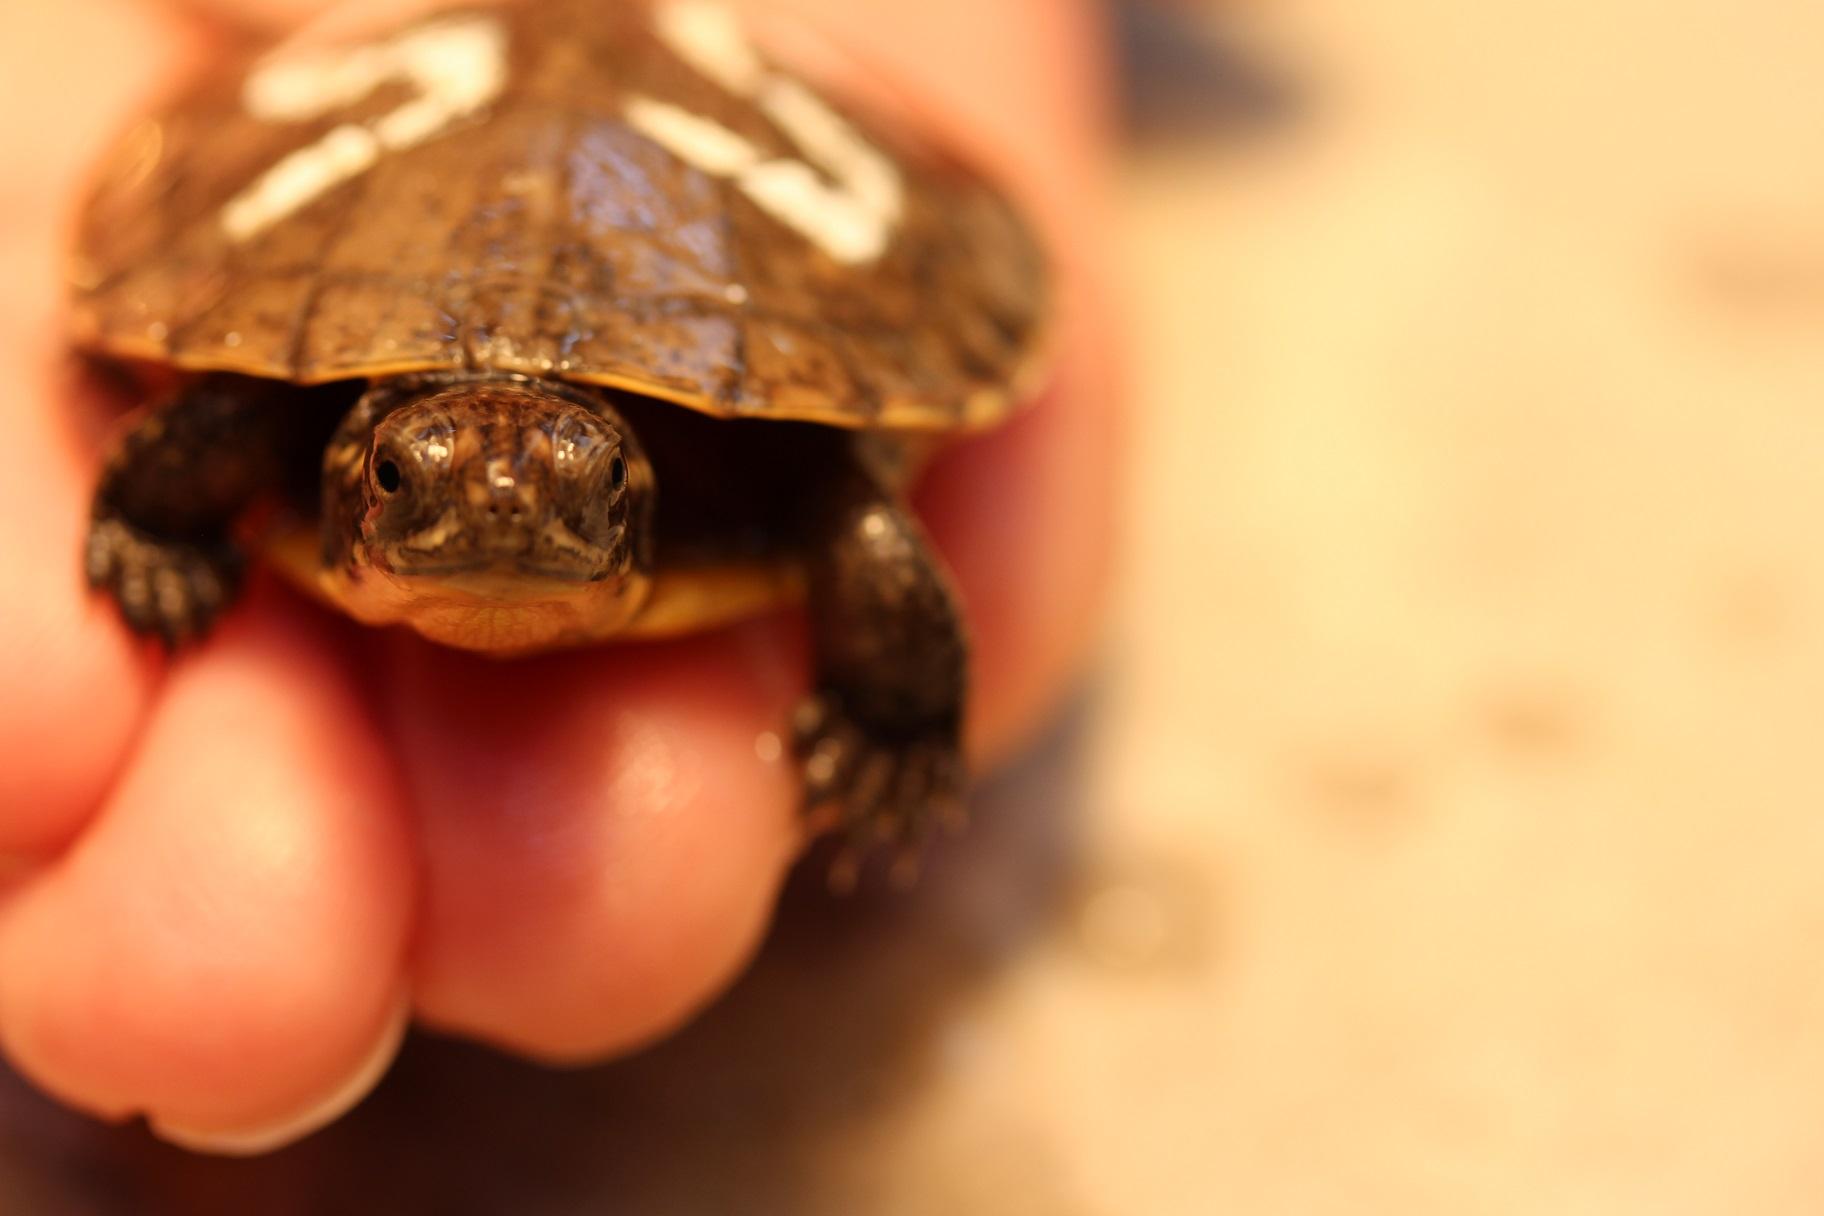 While at the Nature Museum, turtle hatchlings are marked with numbers so that staff can track their growth and development. (Courtesy Peggy Notebaert Nature Museum)